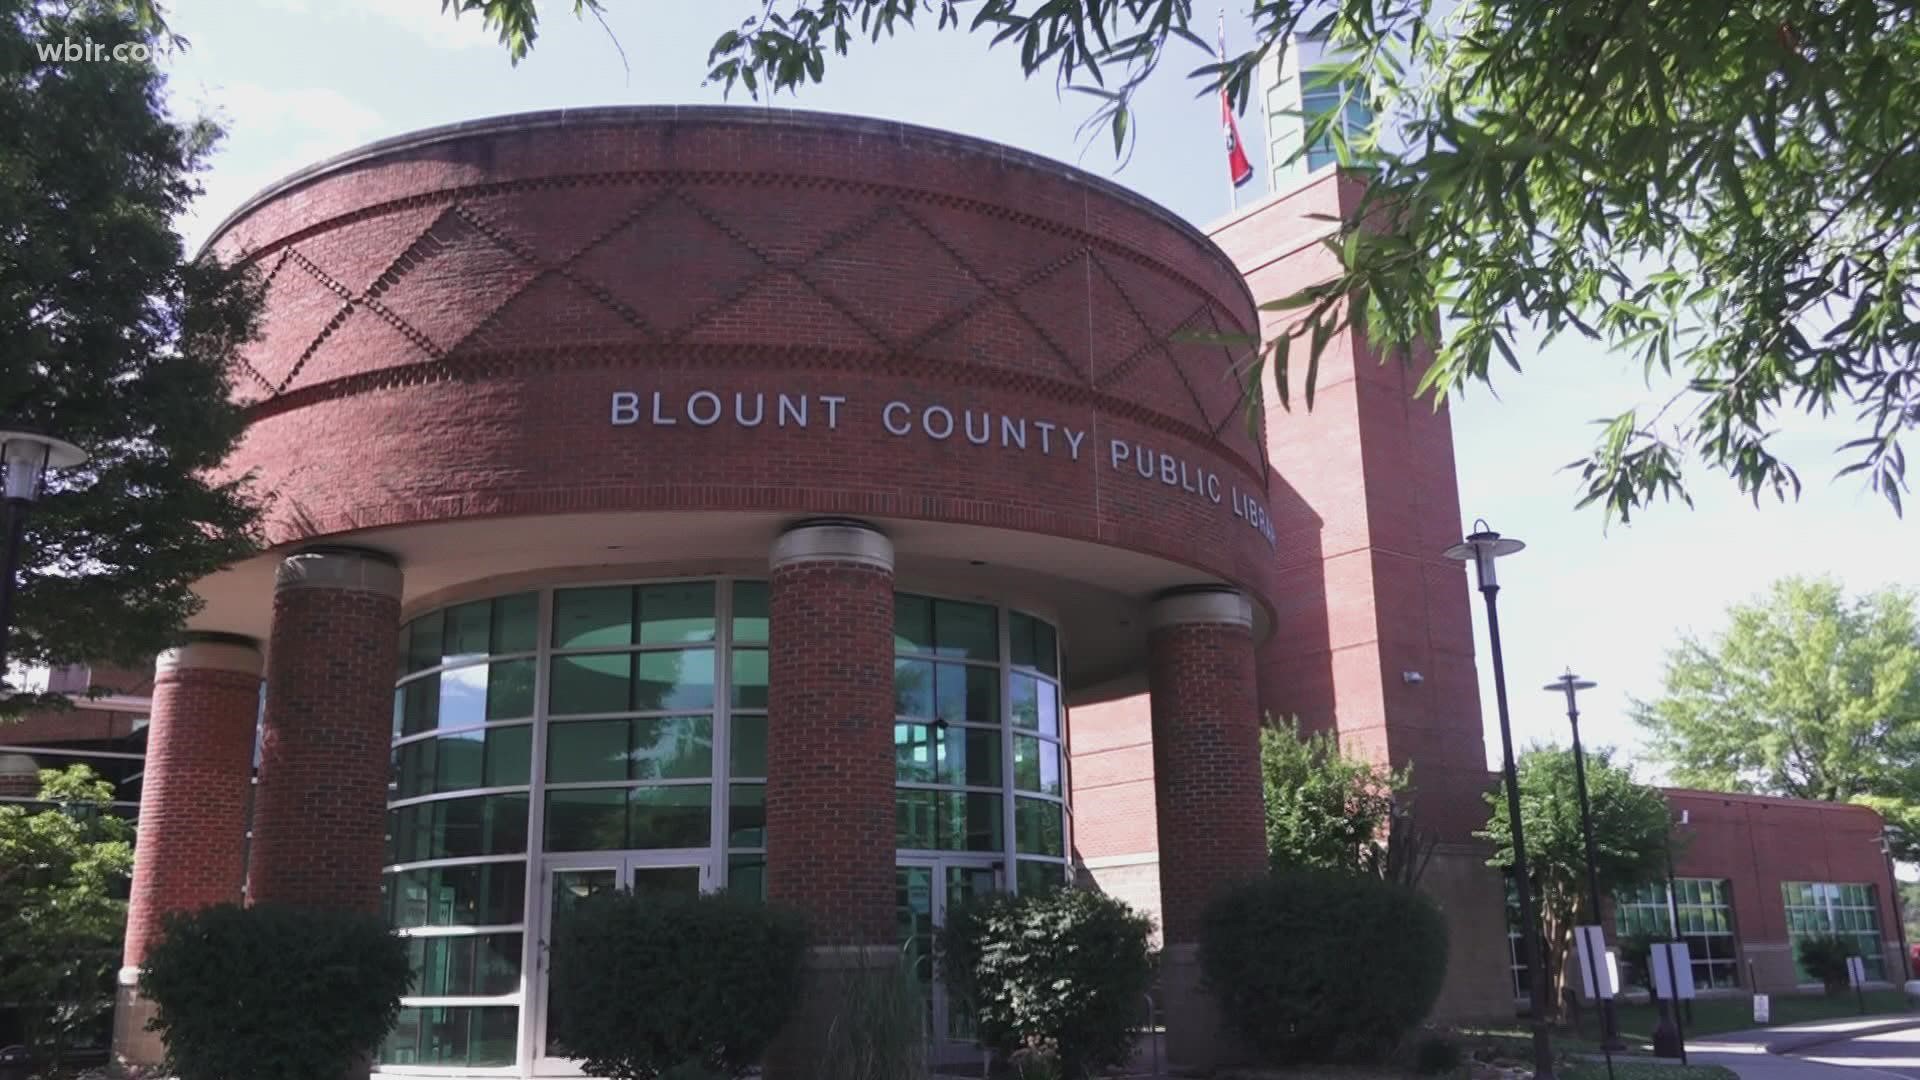 Books, movies, seeds, concerts, science projects, crafts and just a whole lot of fun can be found at the Blount County Public Library.